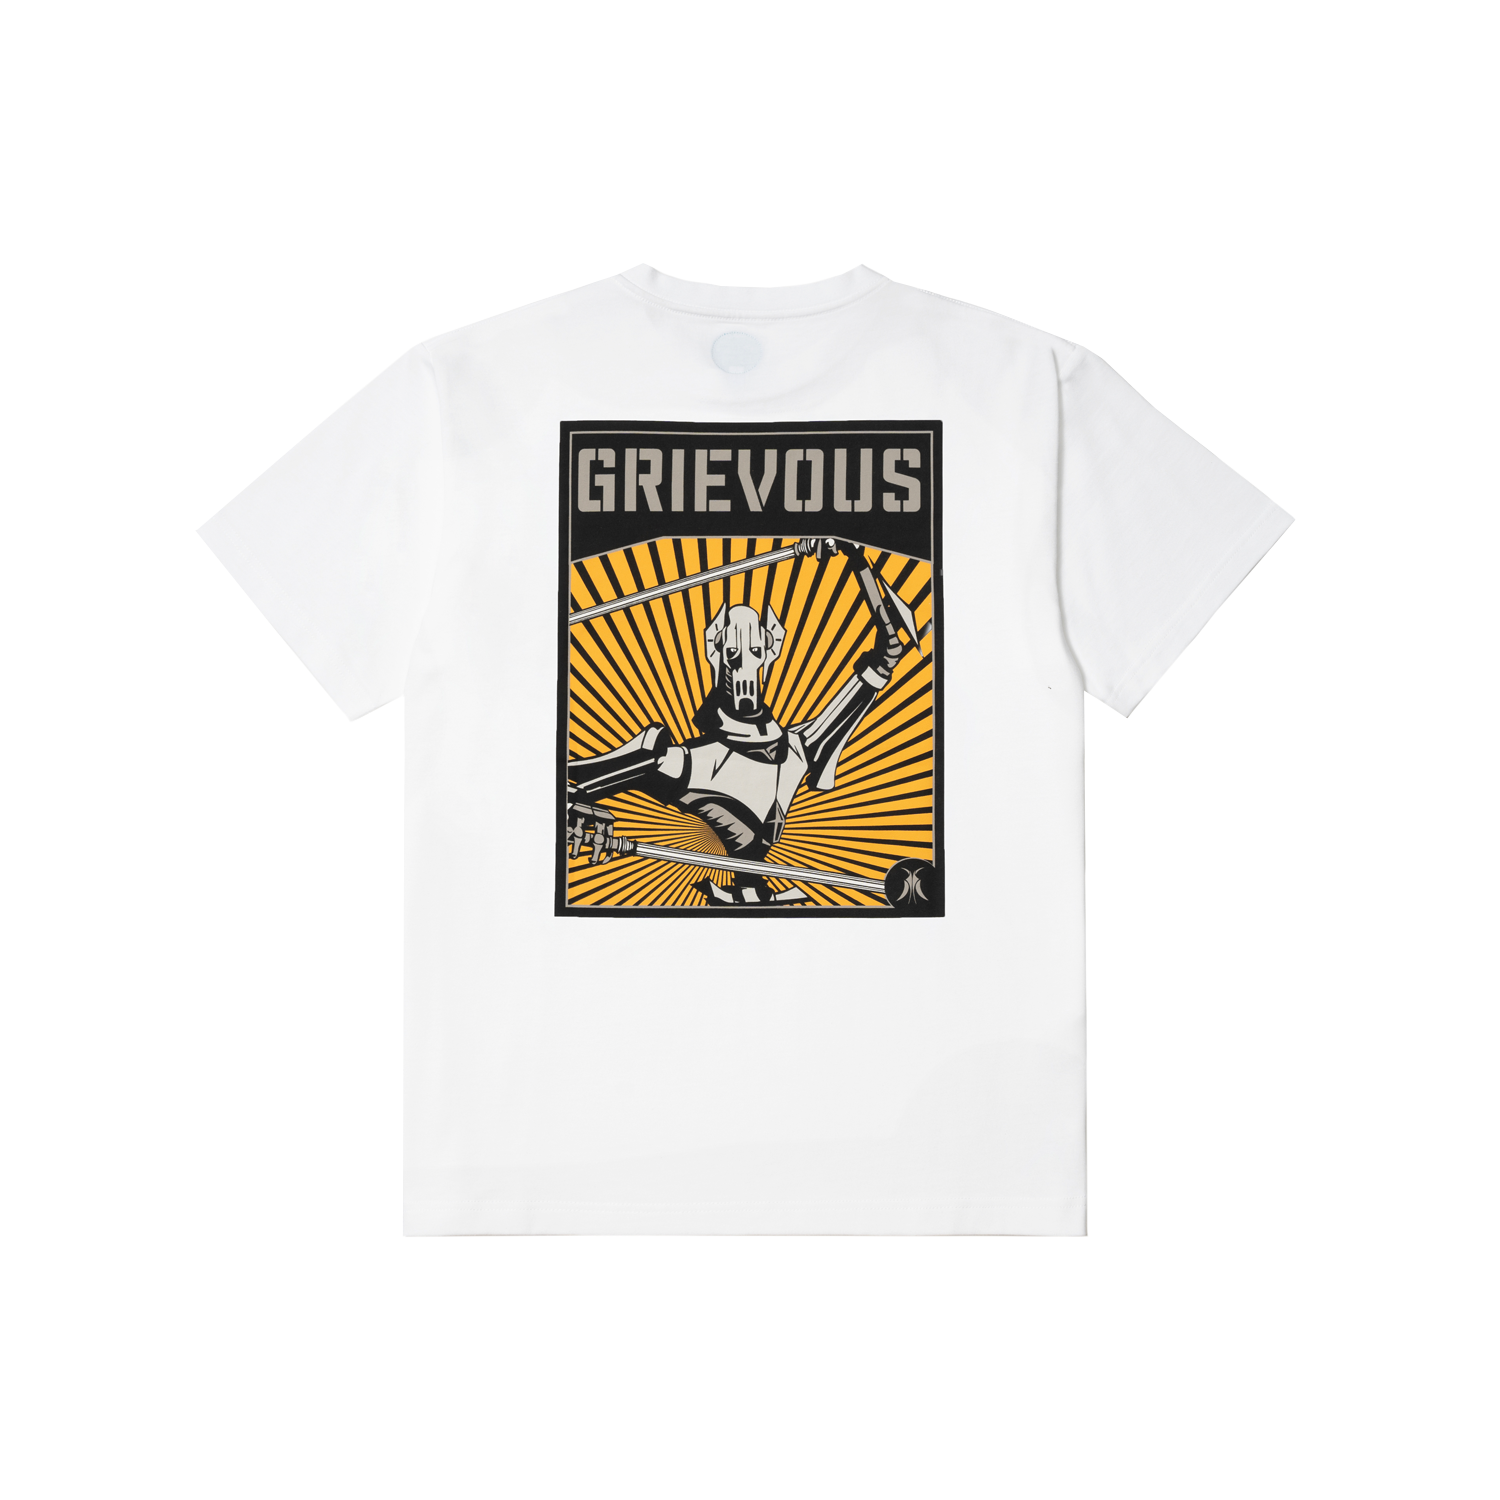 THE CLONE WARS GRIEVOUS POSTER TEE